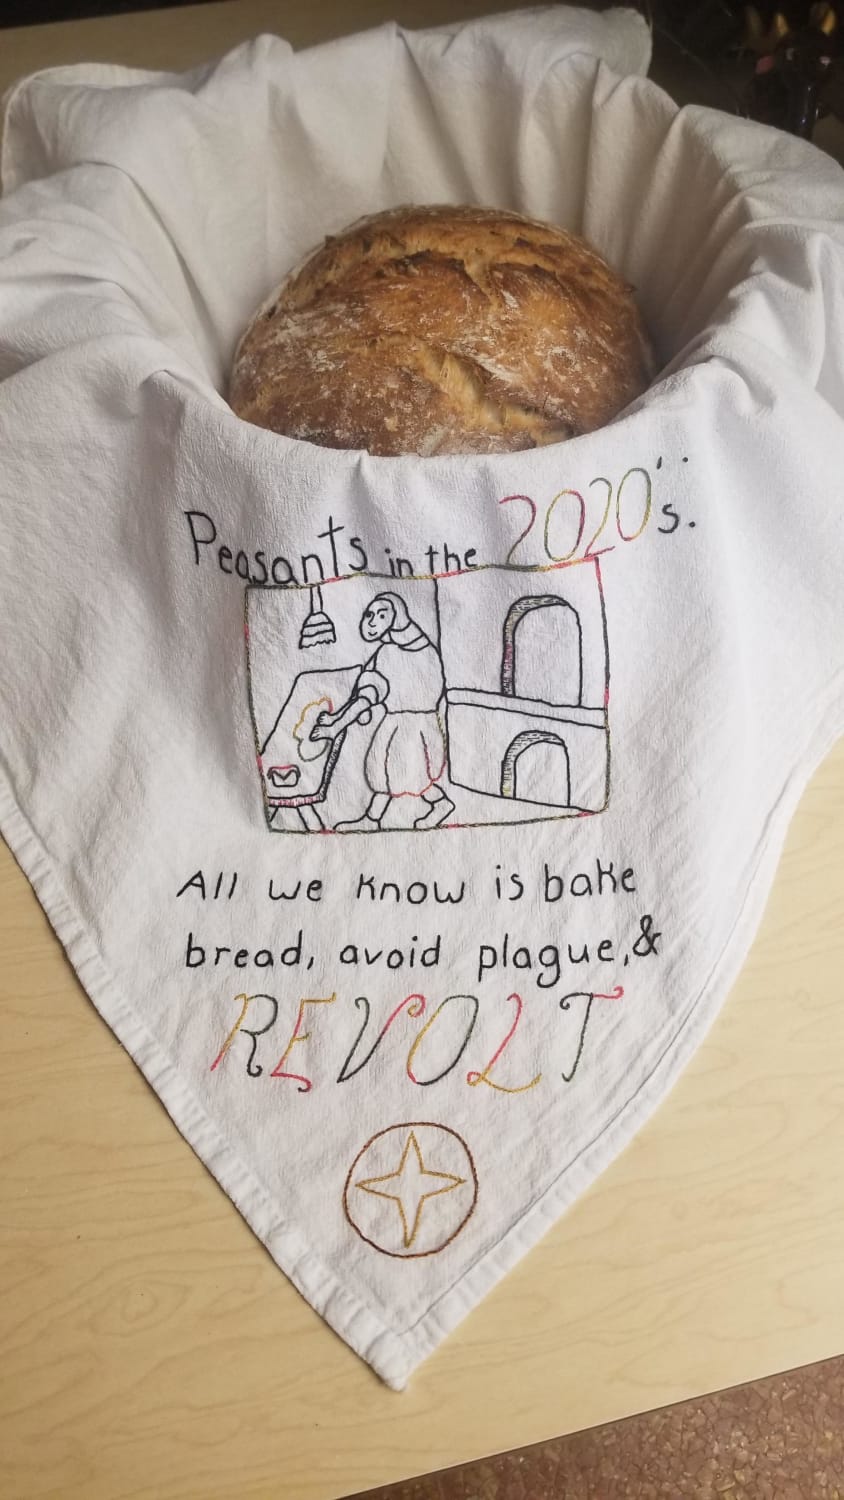 A bread meme stitched on a bread towel to use for baking bread